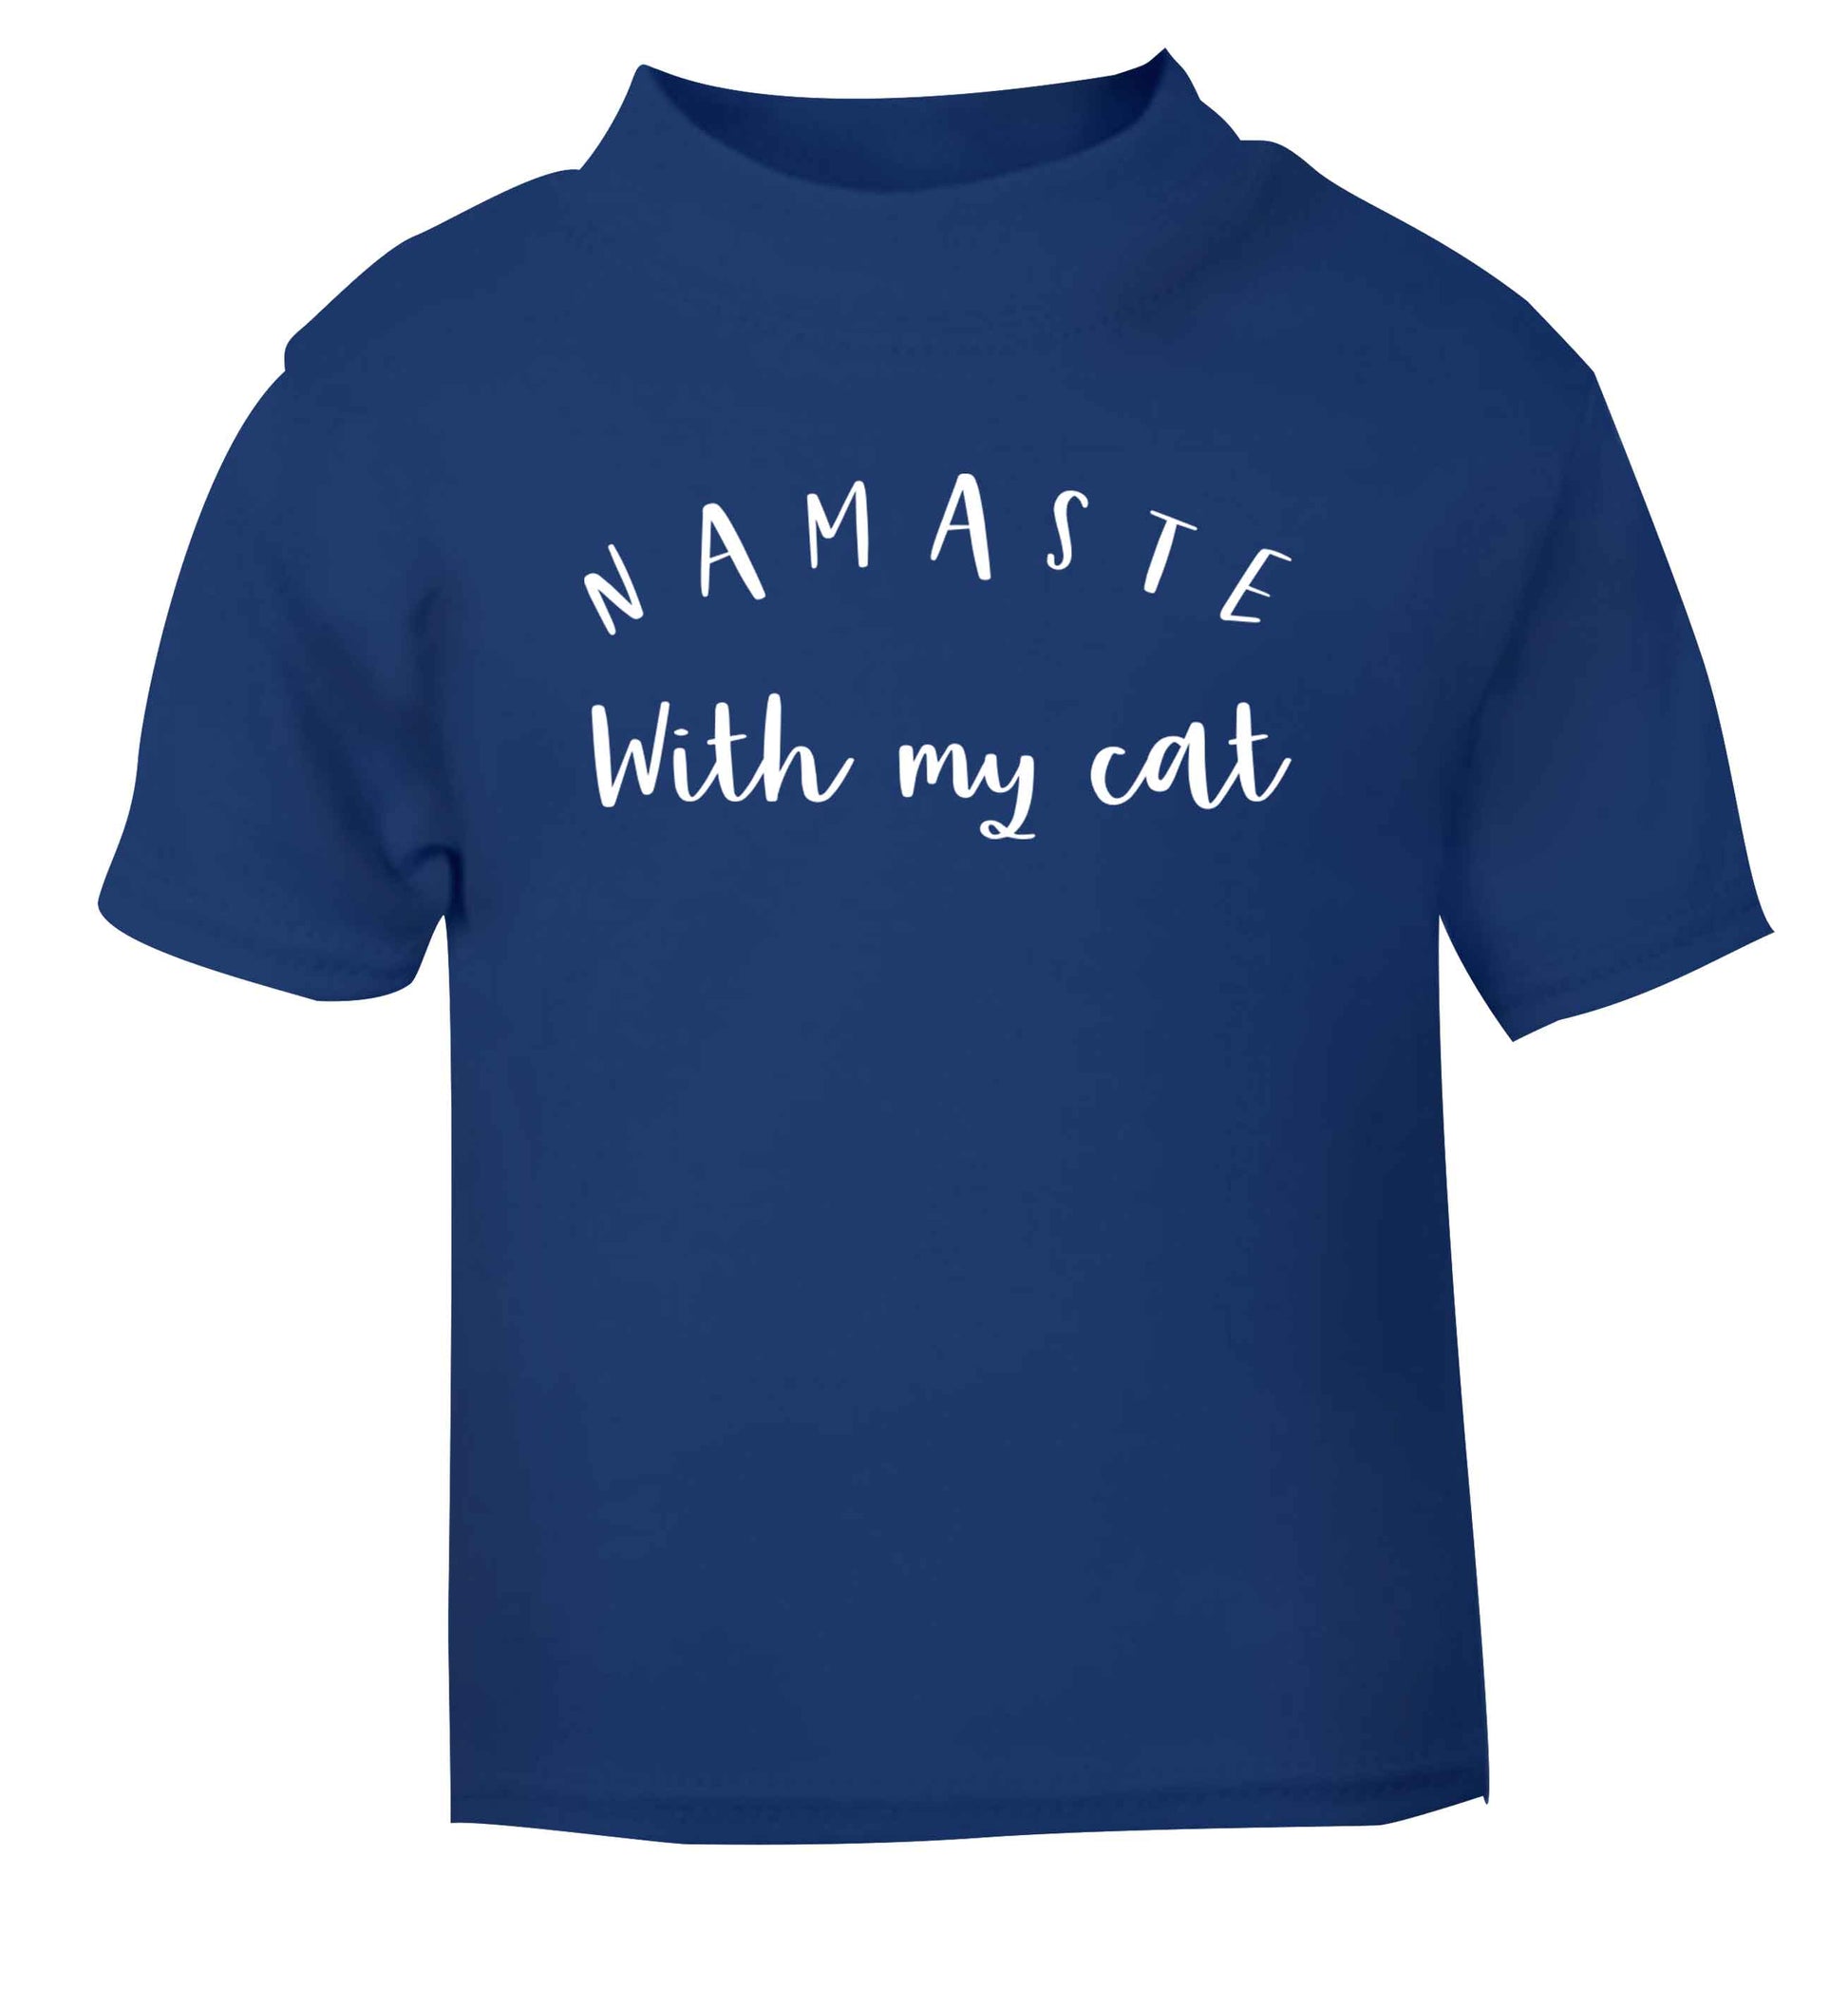 Namaste with my cat blue Baby Toddler Tshirt 2 Years